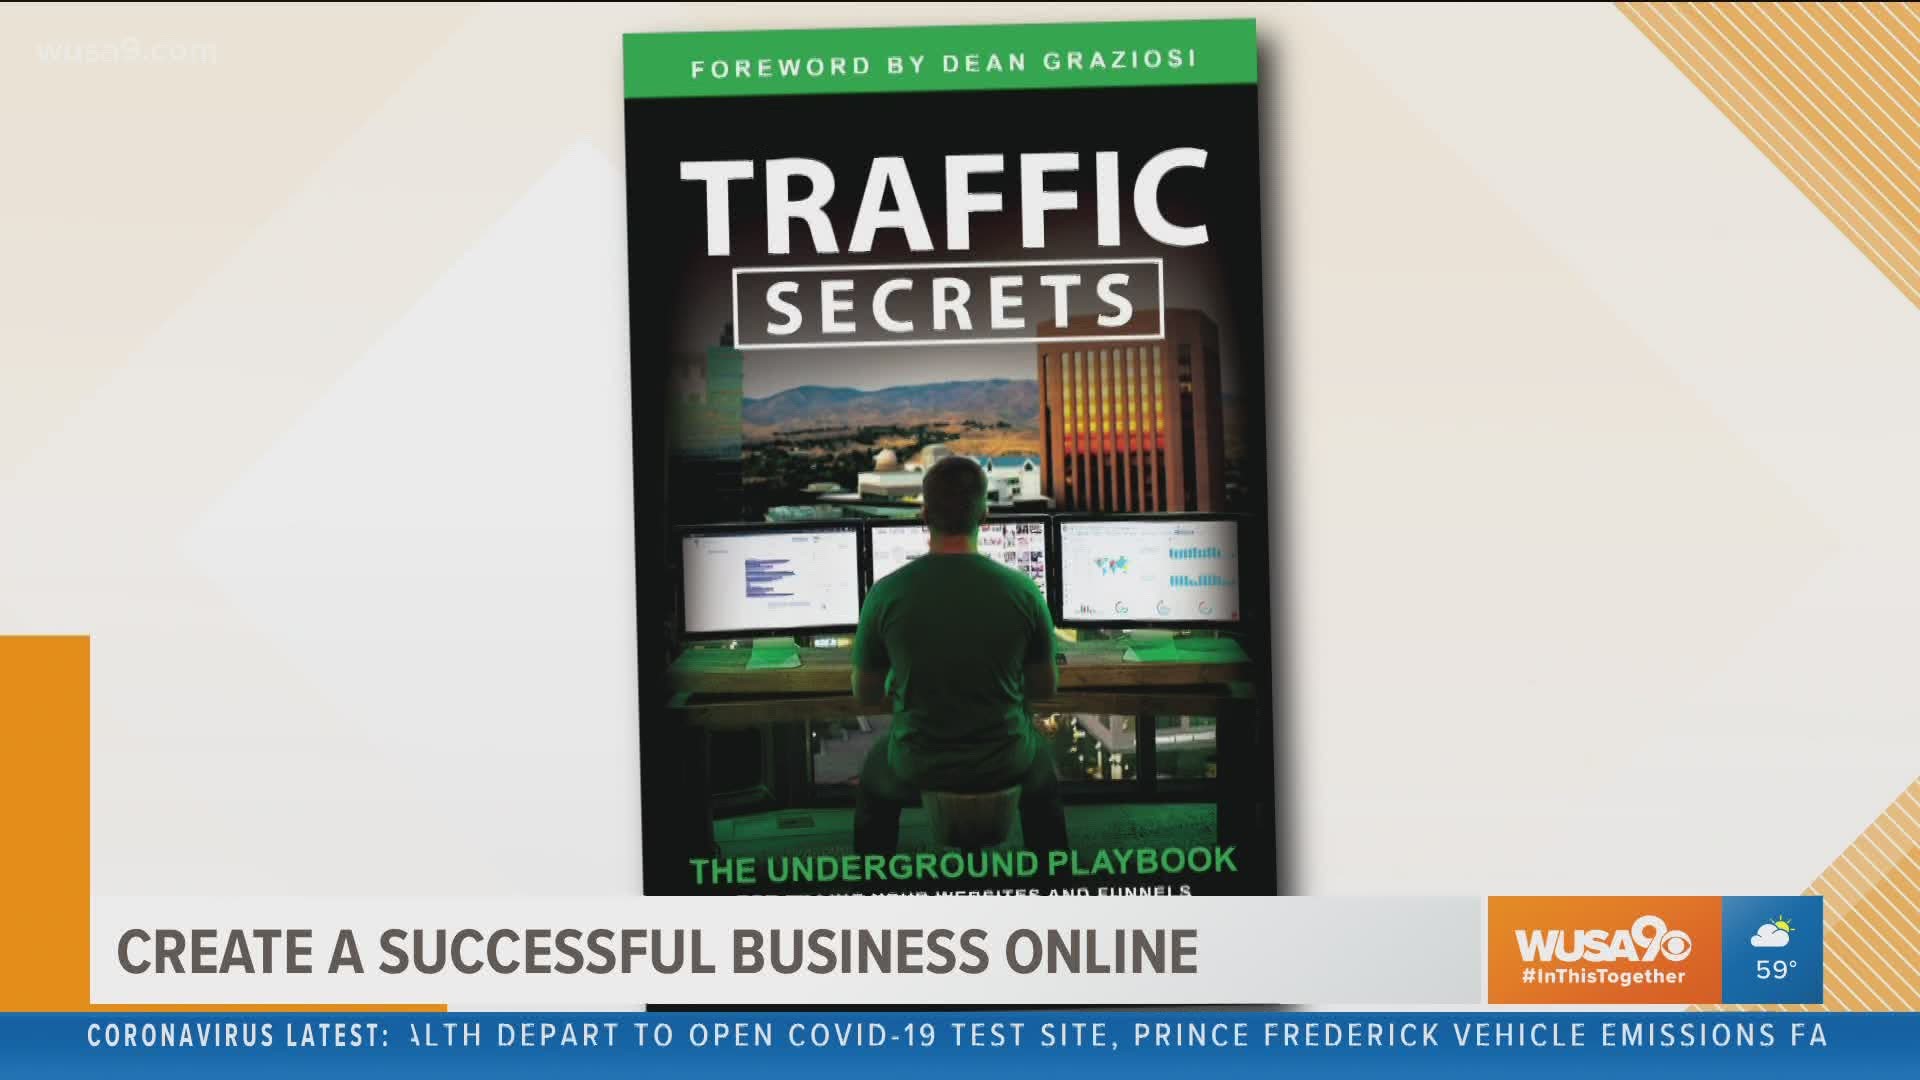 Russell Brunson, author of "Traffic Secrets" shares how to get your side hustle or new business up and going online.